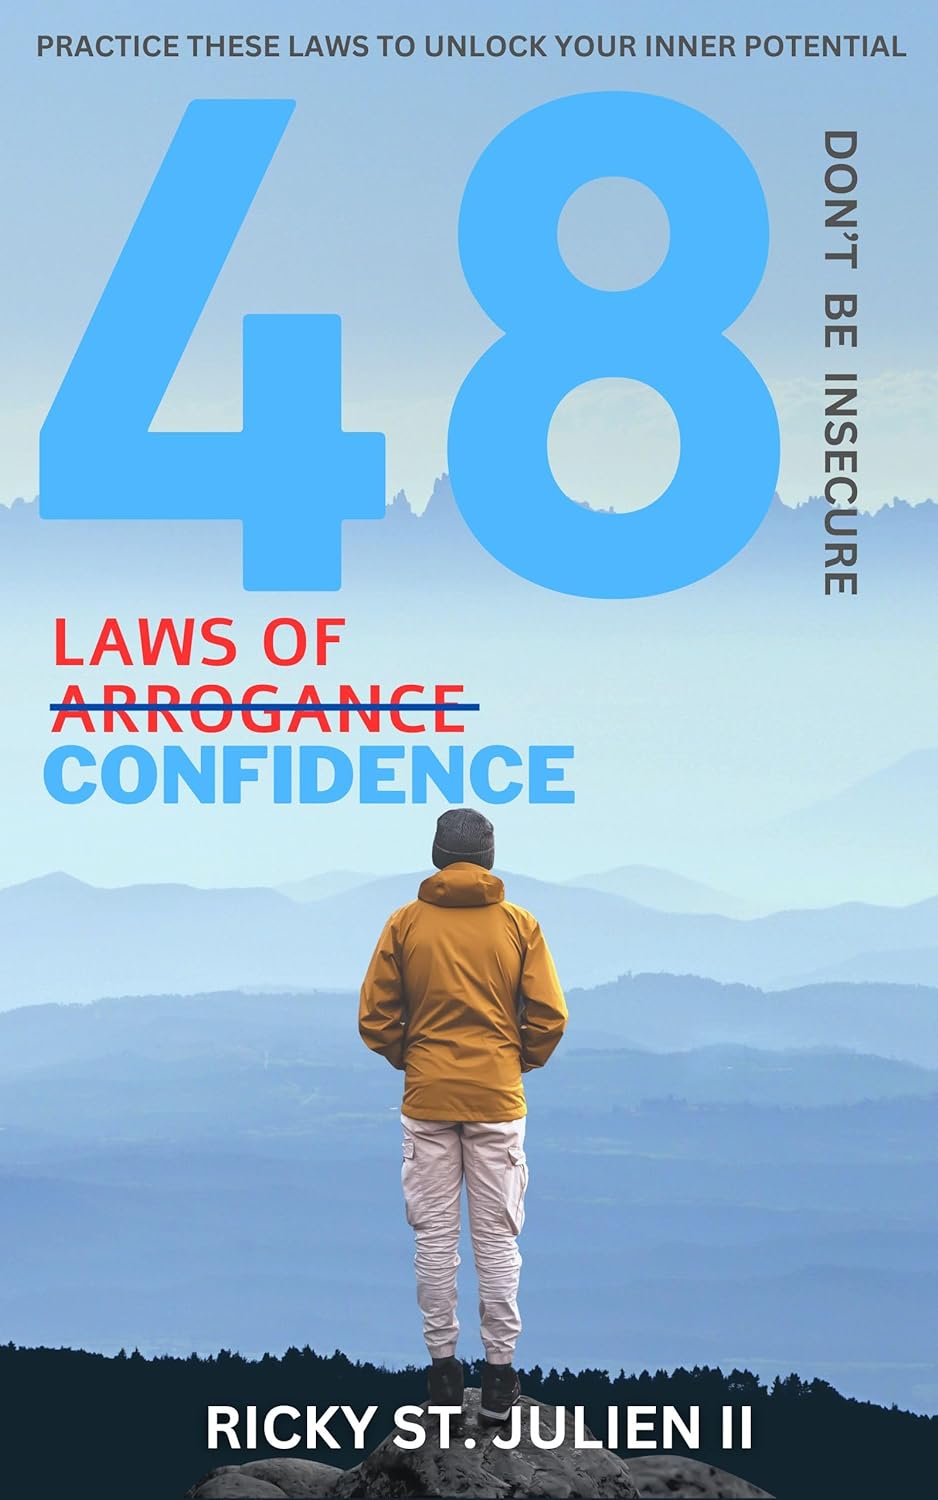 Ricky St. Julien II Releases New Self-Help Book - 48 Laws of Confidence - Don't Be Insecure